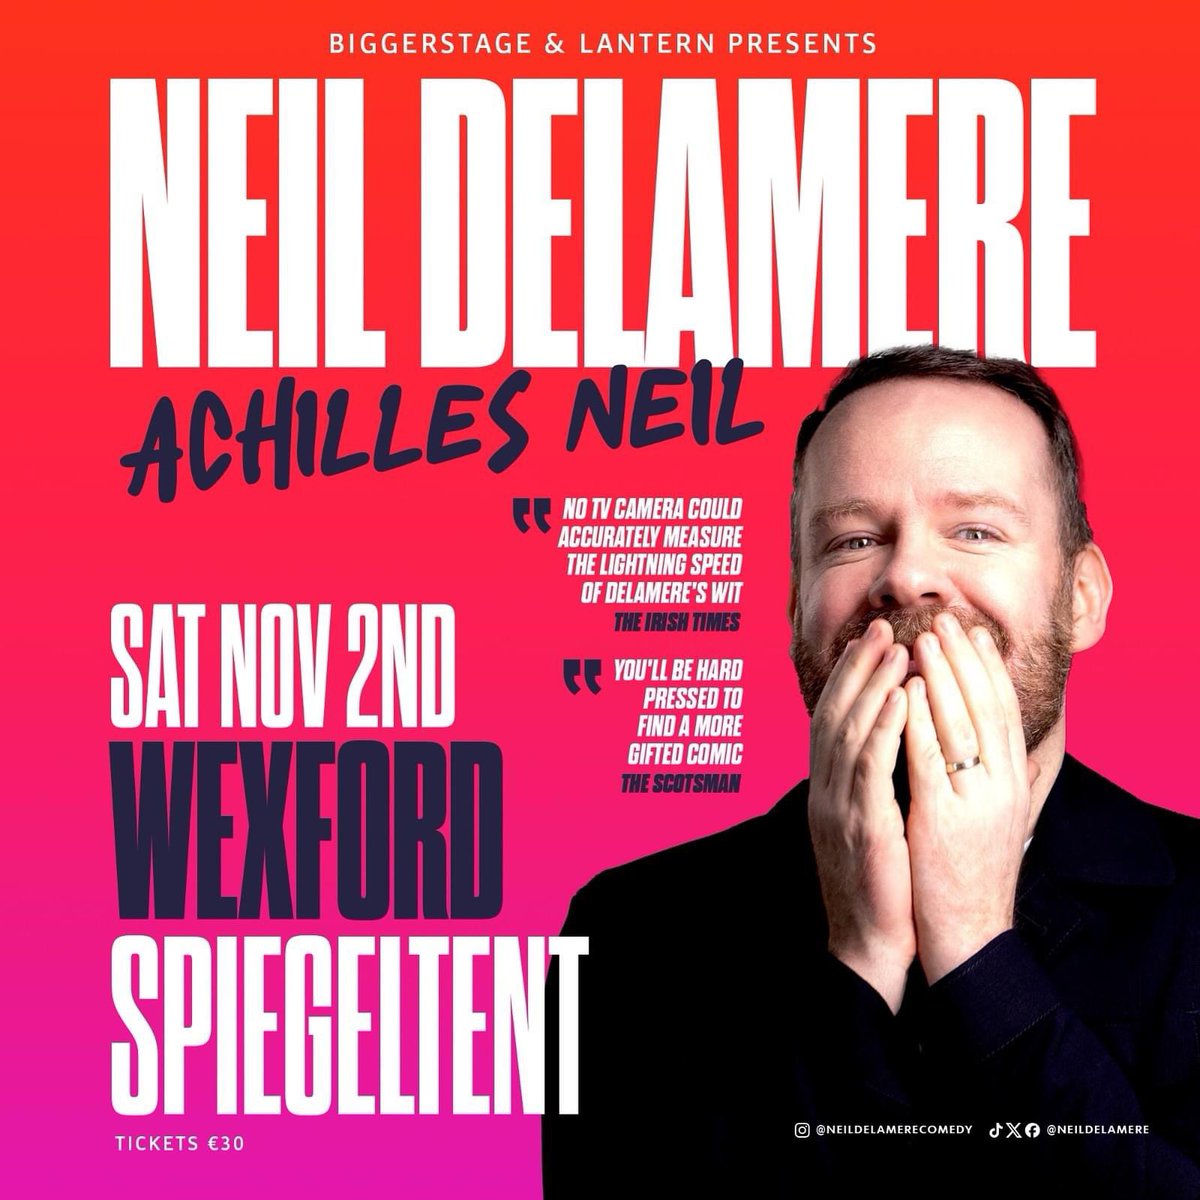 Show Announcement🎪 The hilarious @neildelamere returns to Wexford Spiegeltent Festival with his brand new show Achilles Neil 🤣 We cannot wait to hear the new show🤩 Tickets go on sale this Friday at 10am